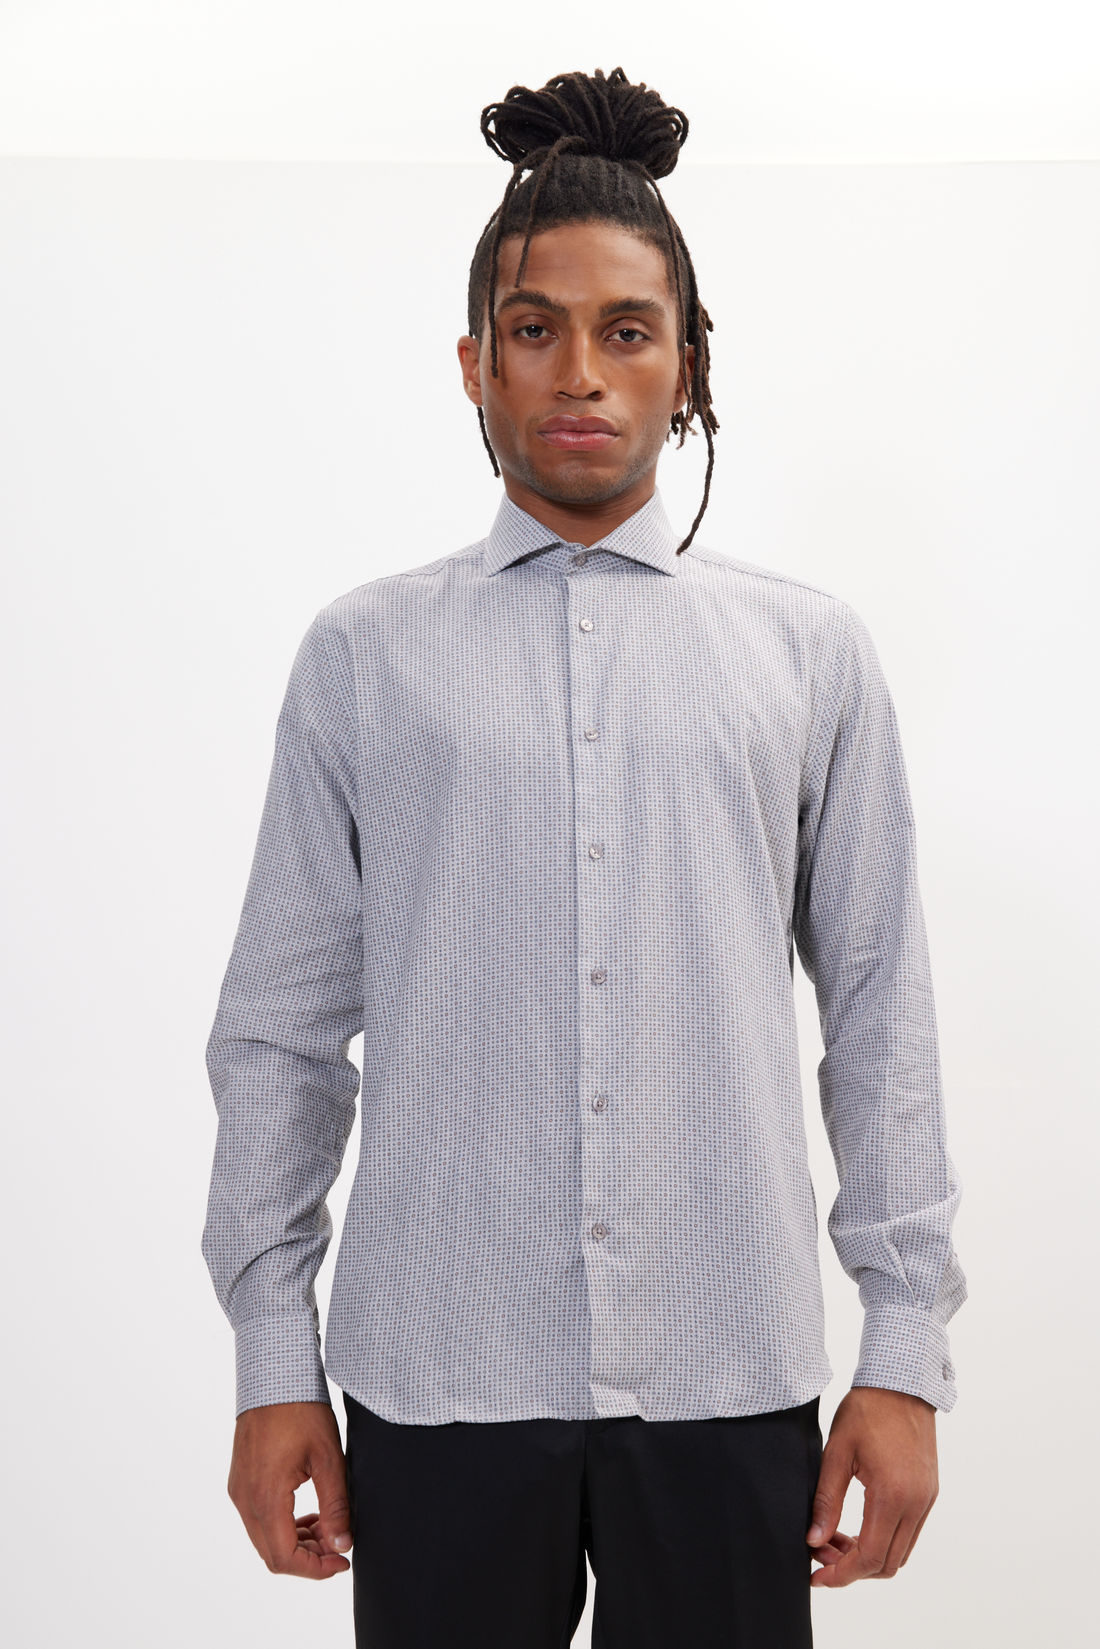 N° AN4903 PURE COTTON FRENCH PLACKET SPREAD COLLAR CASUAL SHIRT - GREY BENGAL STRIPES